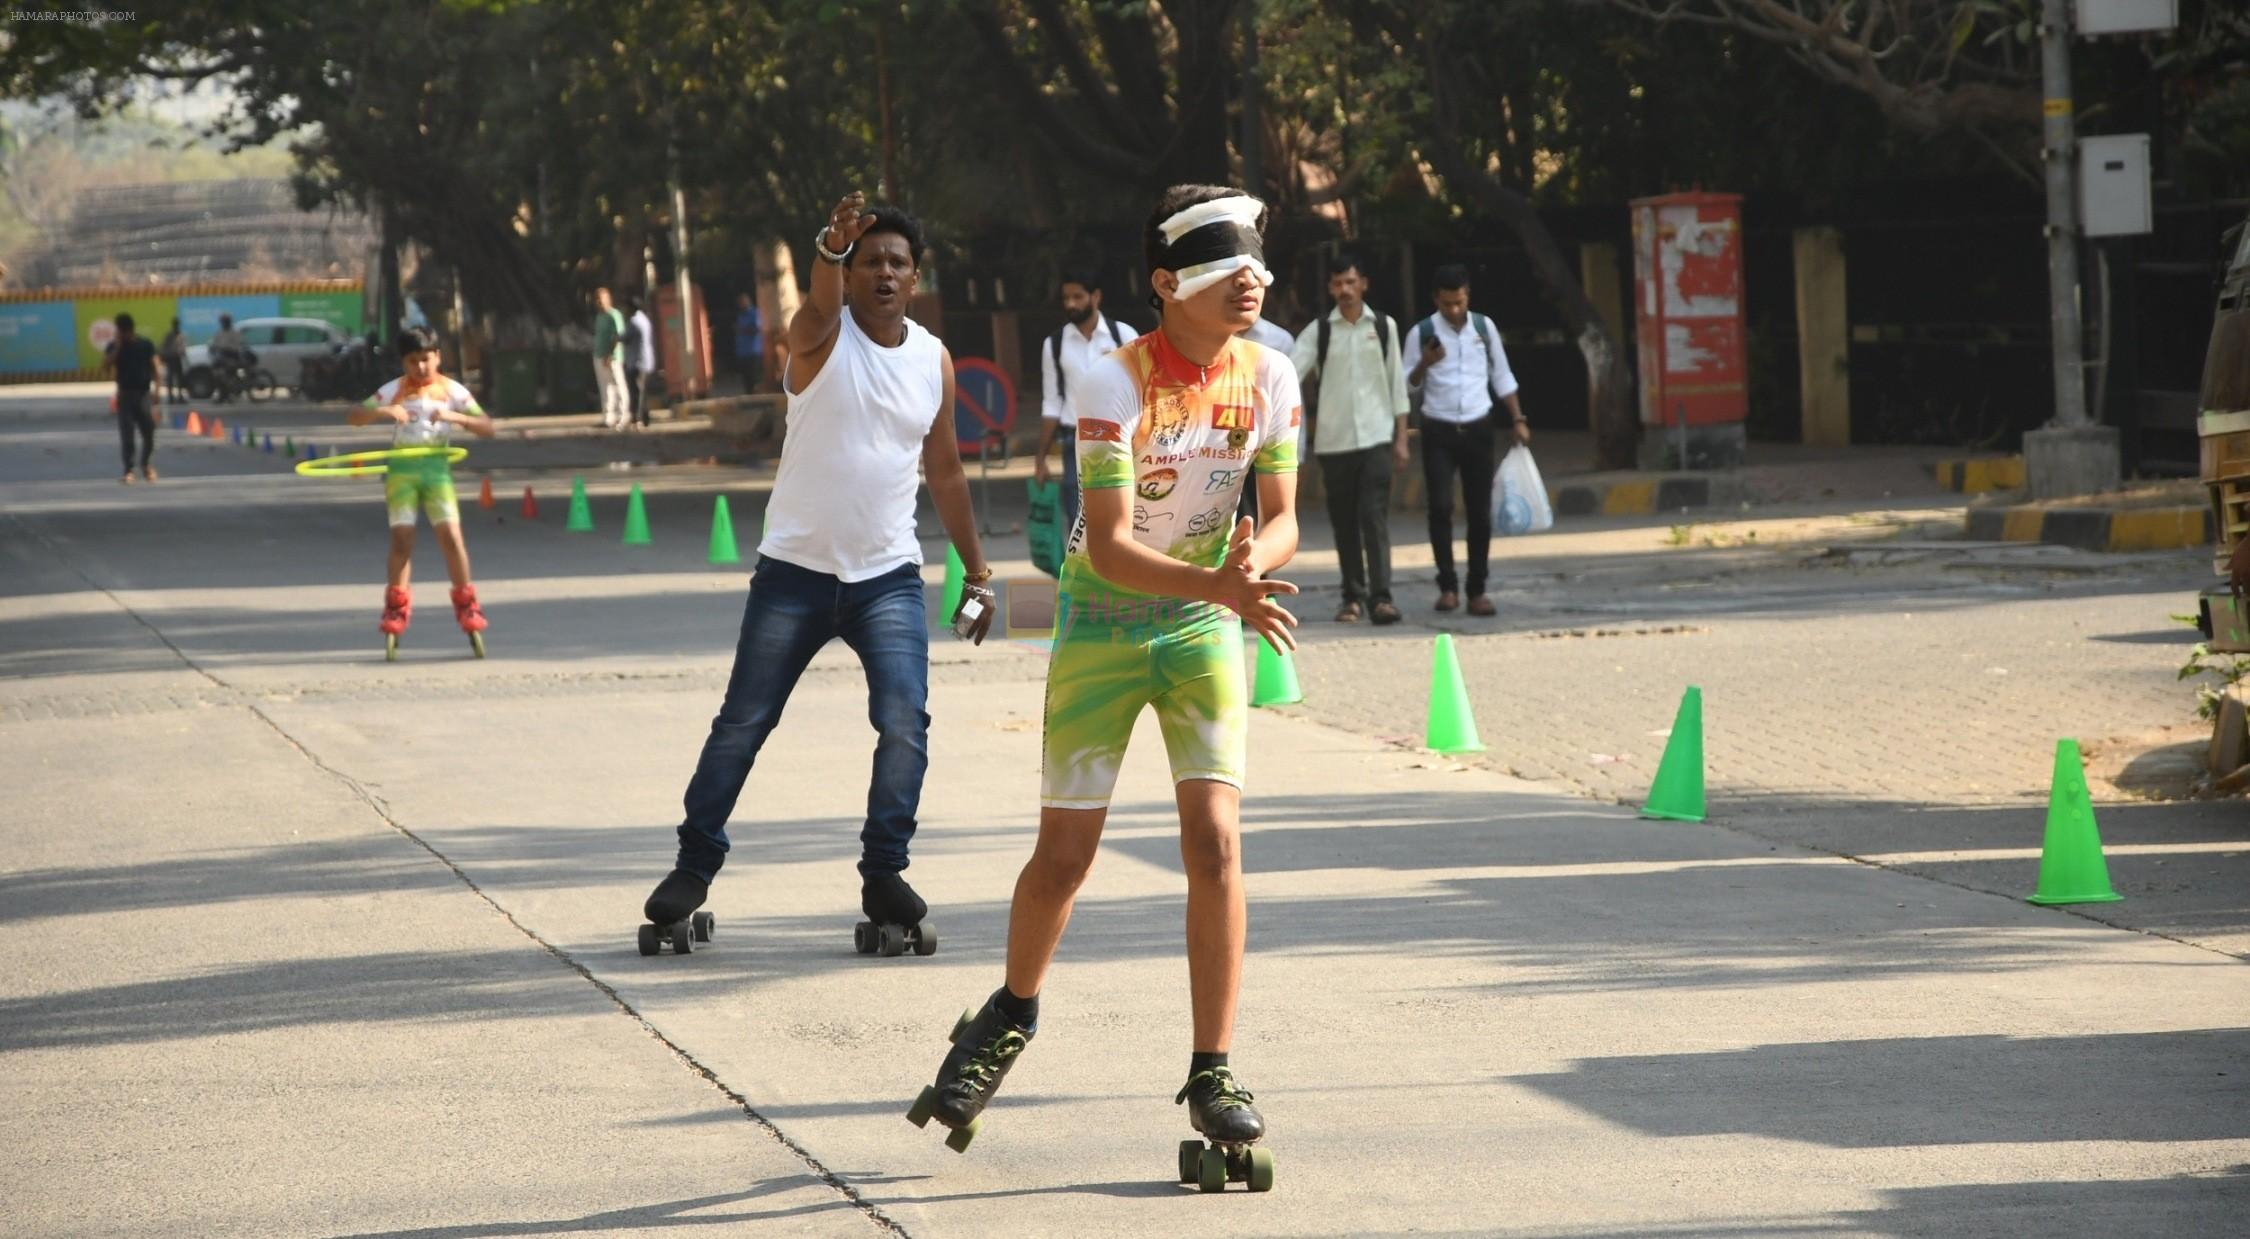 Jeet Trivedi with his Blindfolded Skating Act and World Record on 27th Jan 2018